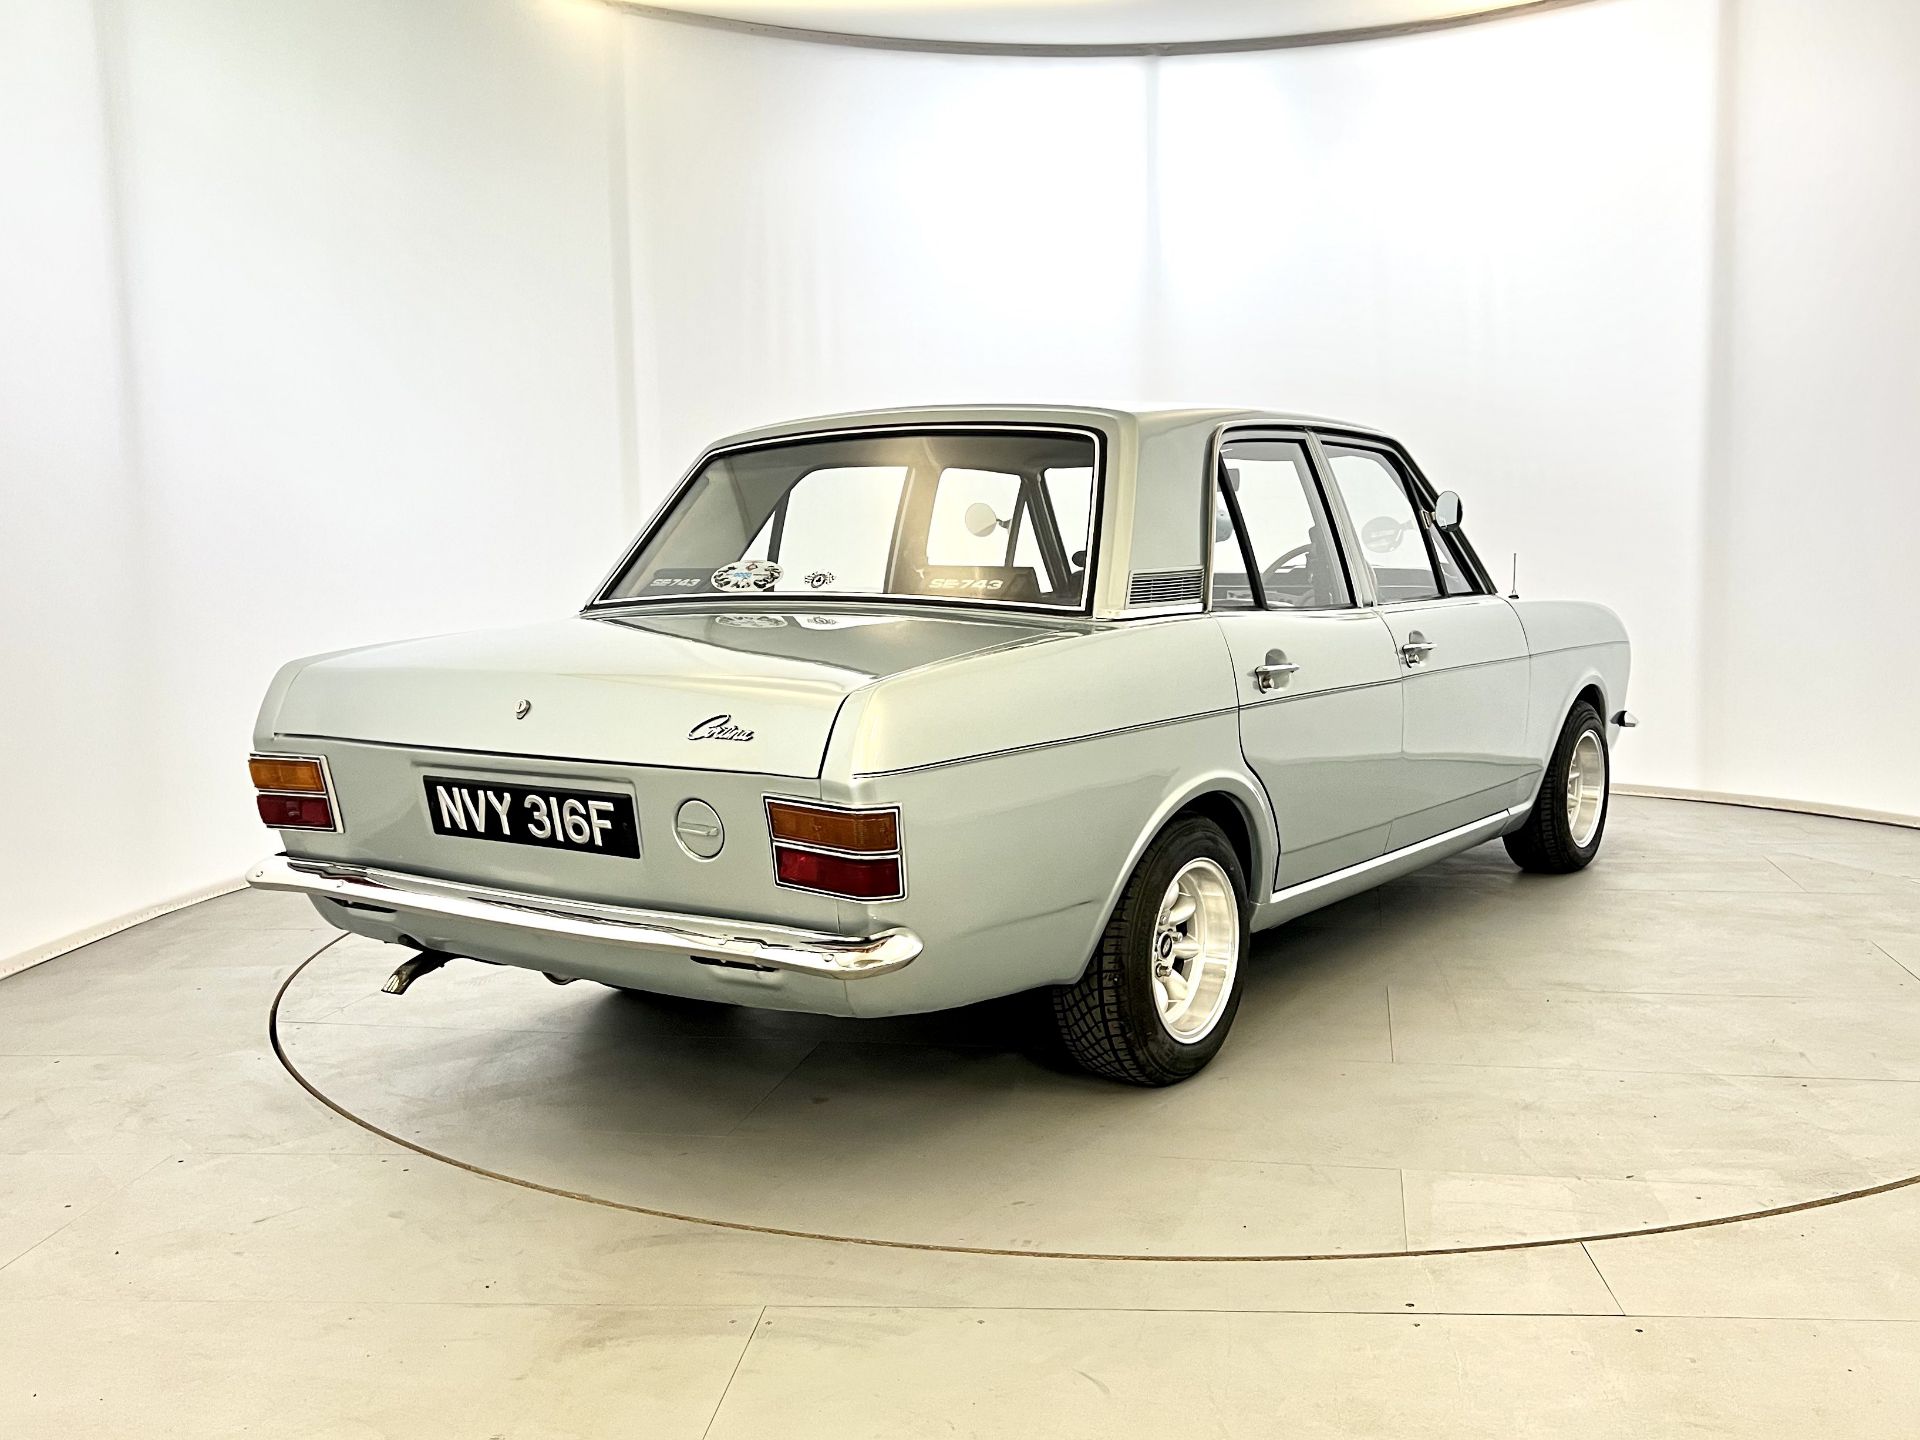 Ford Cortina 1300 DeLuxe - Image 9 of 36